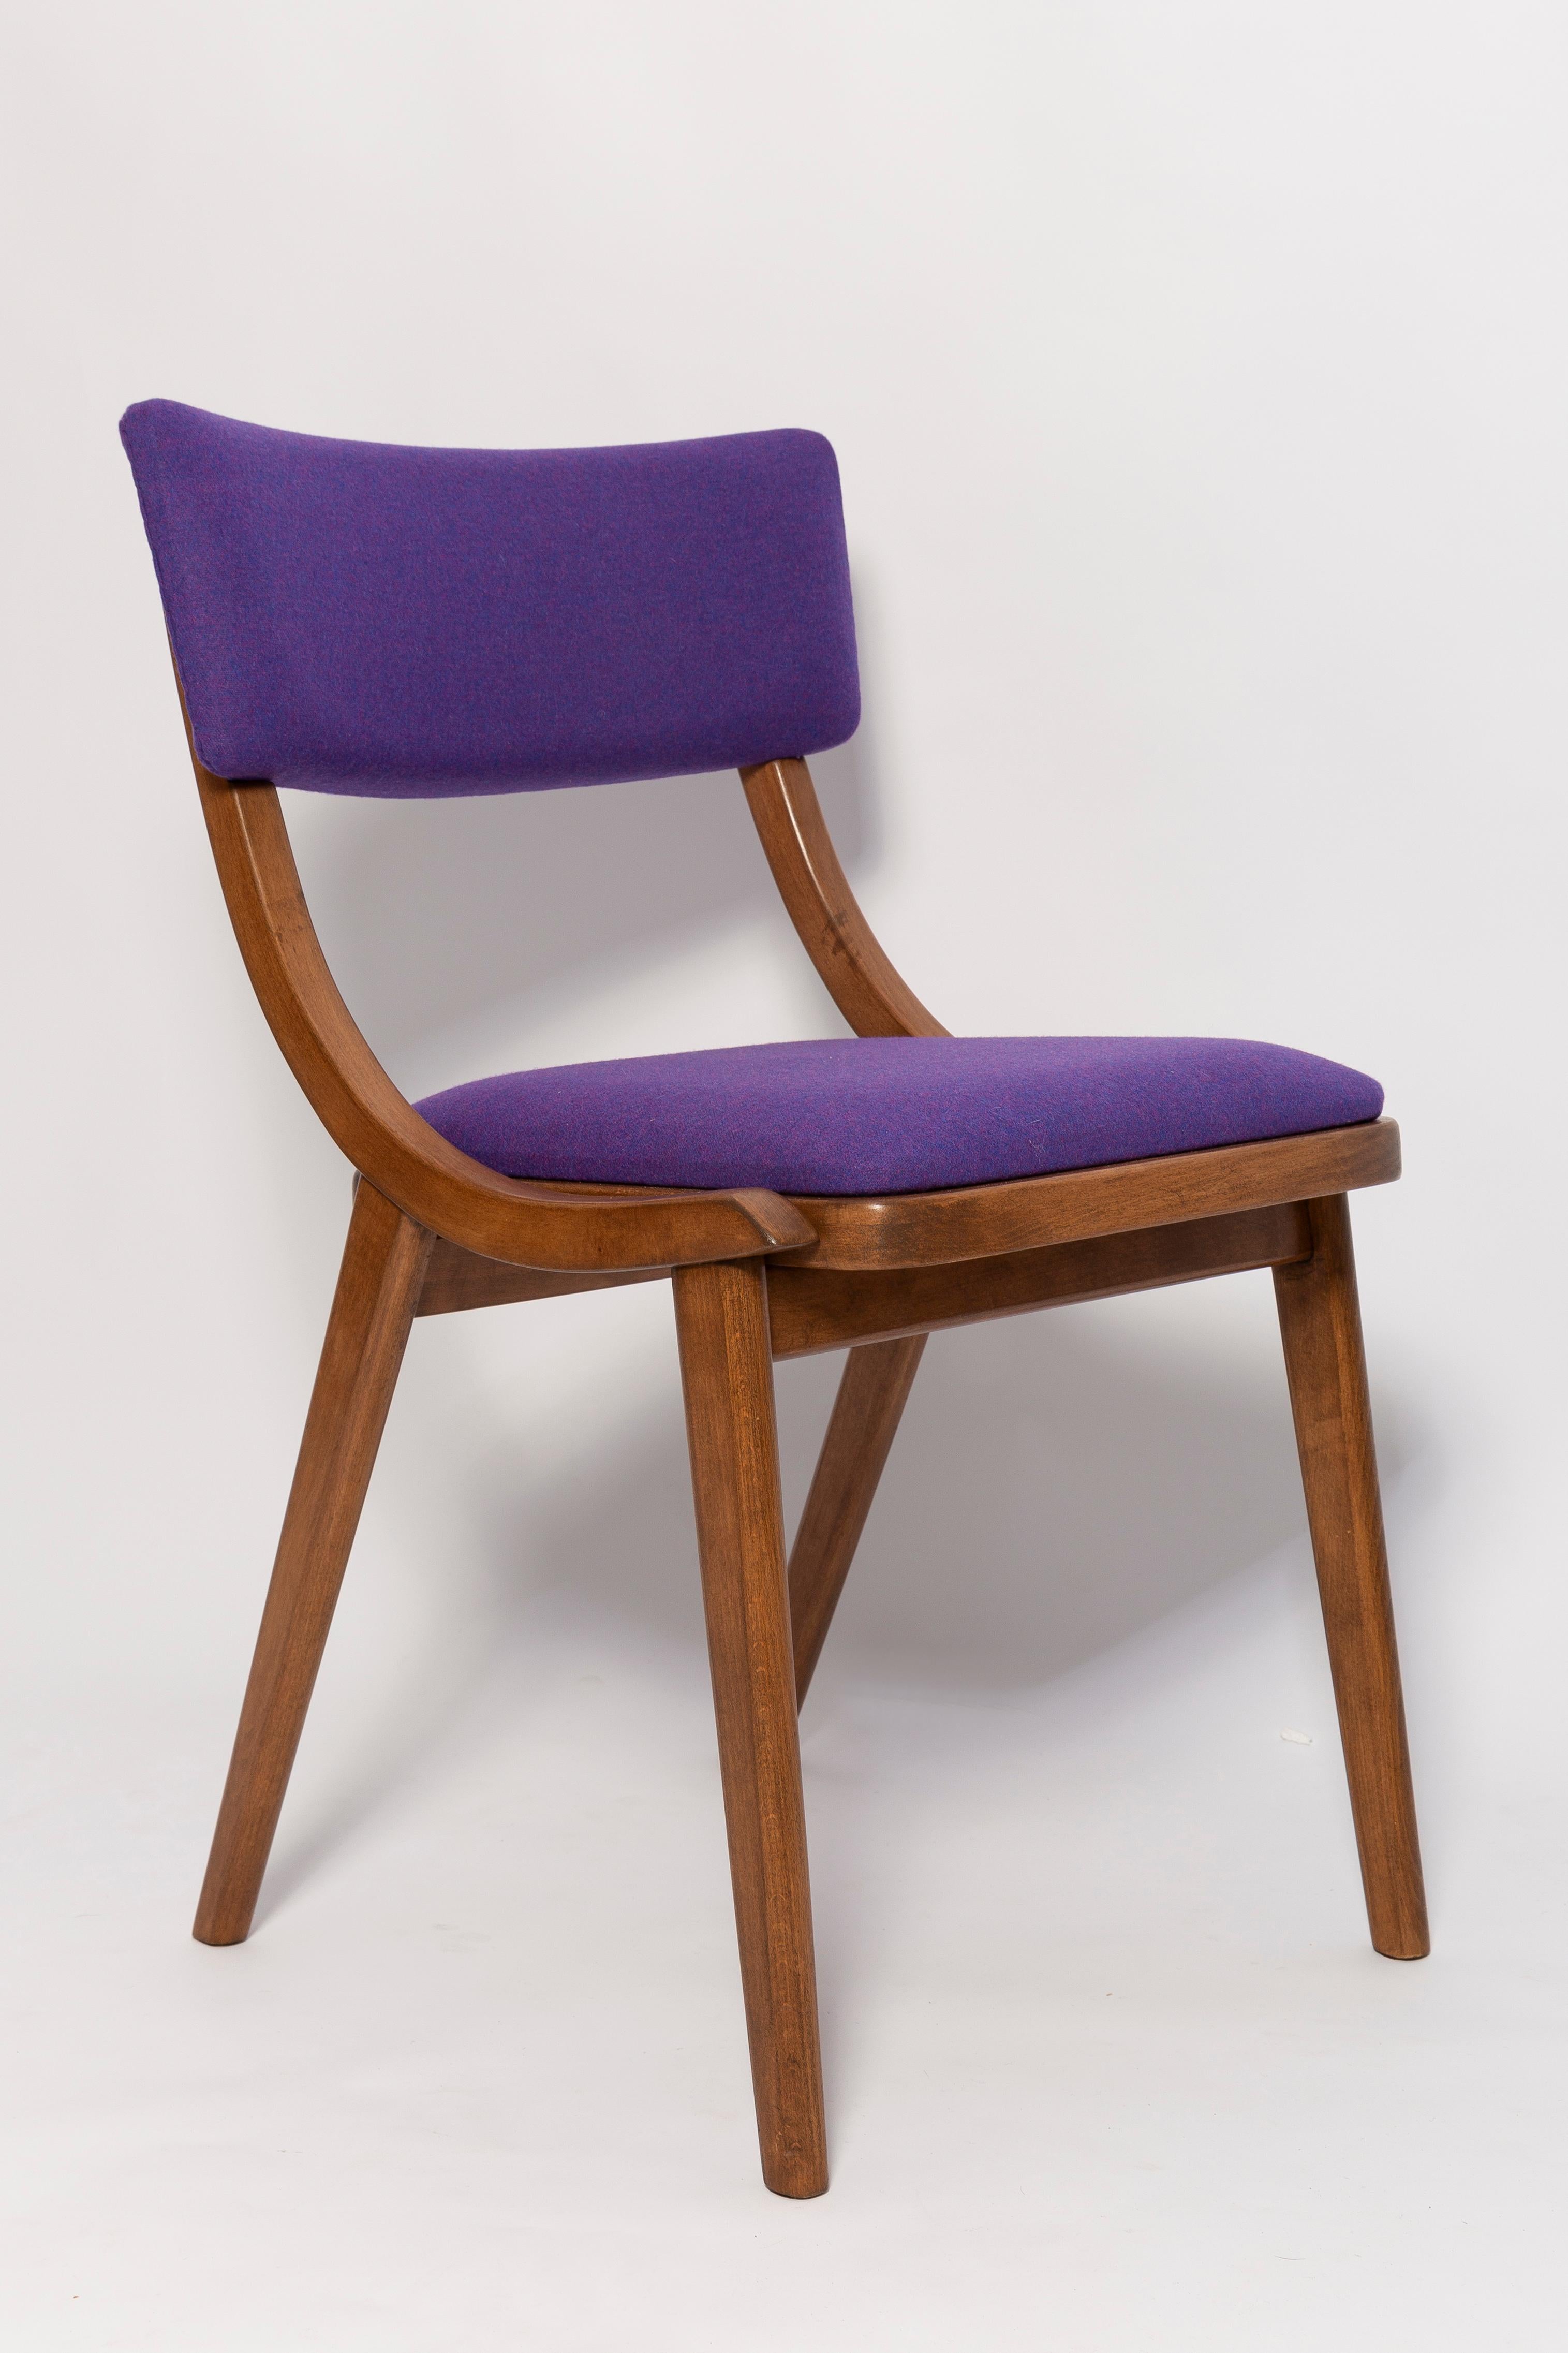 Six Mid Century Modern Bumerang Chairs, Purple Violet Wool, Poland, 1960s In Excellent Condition For Sale In 05-080 Hornowek, PL